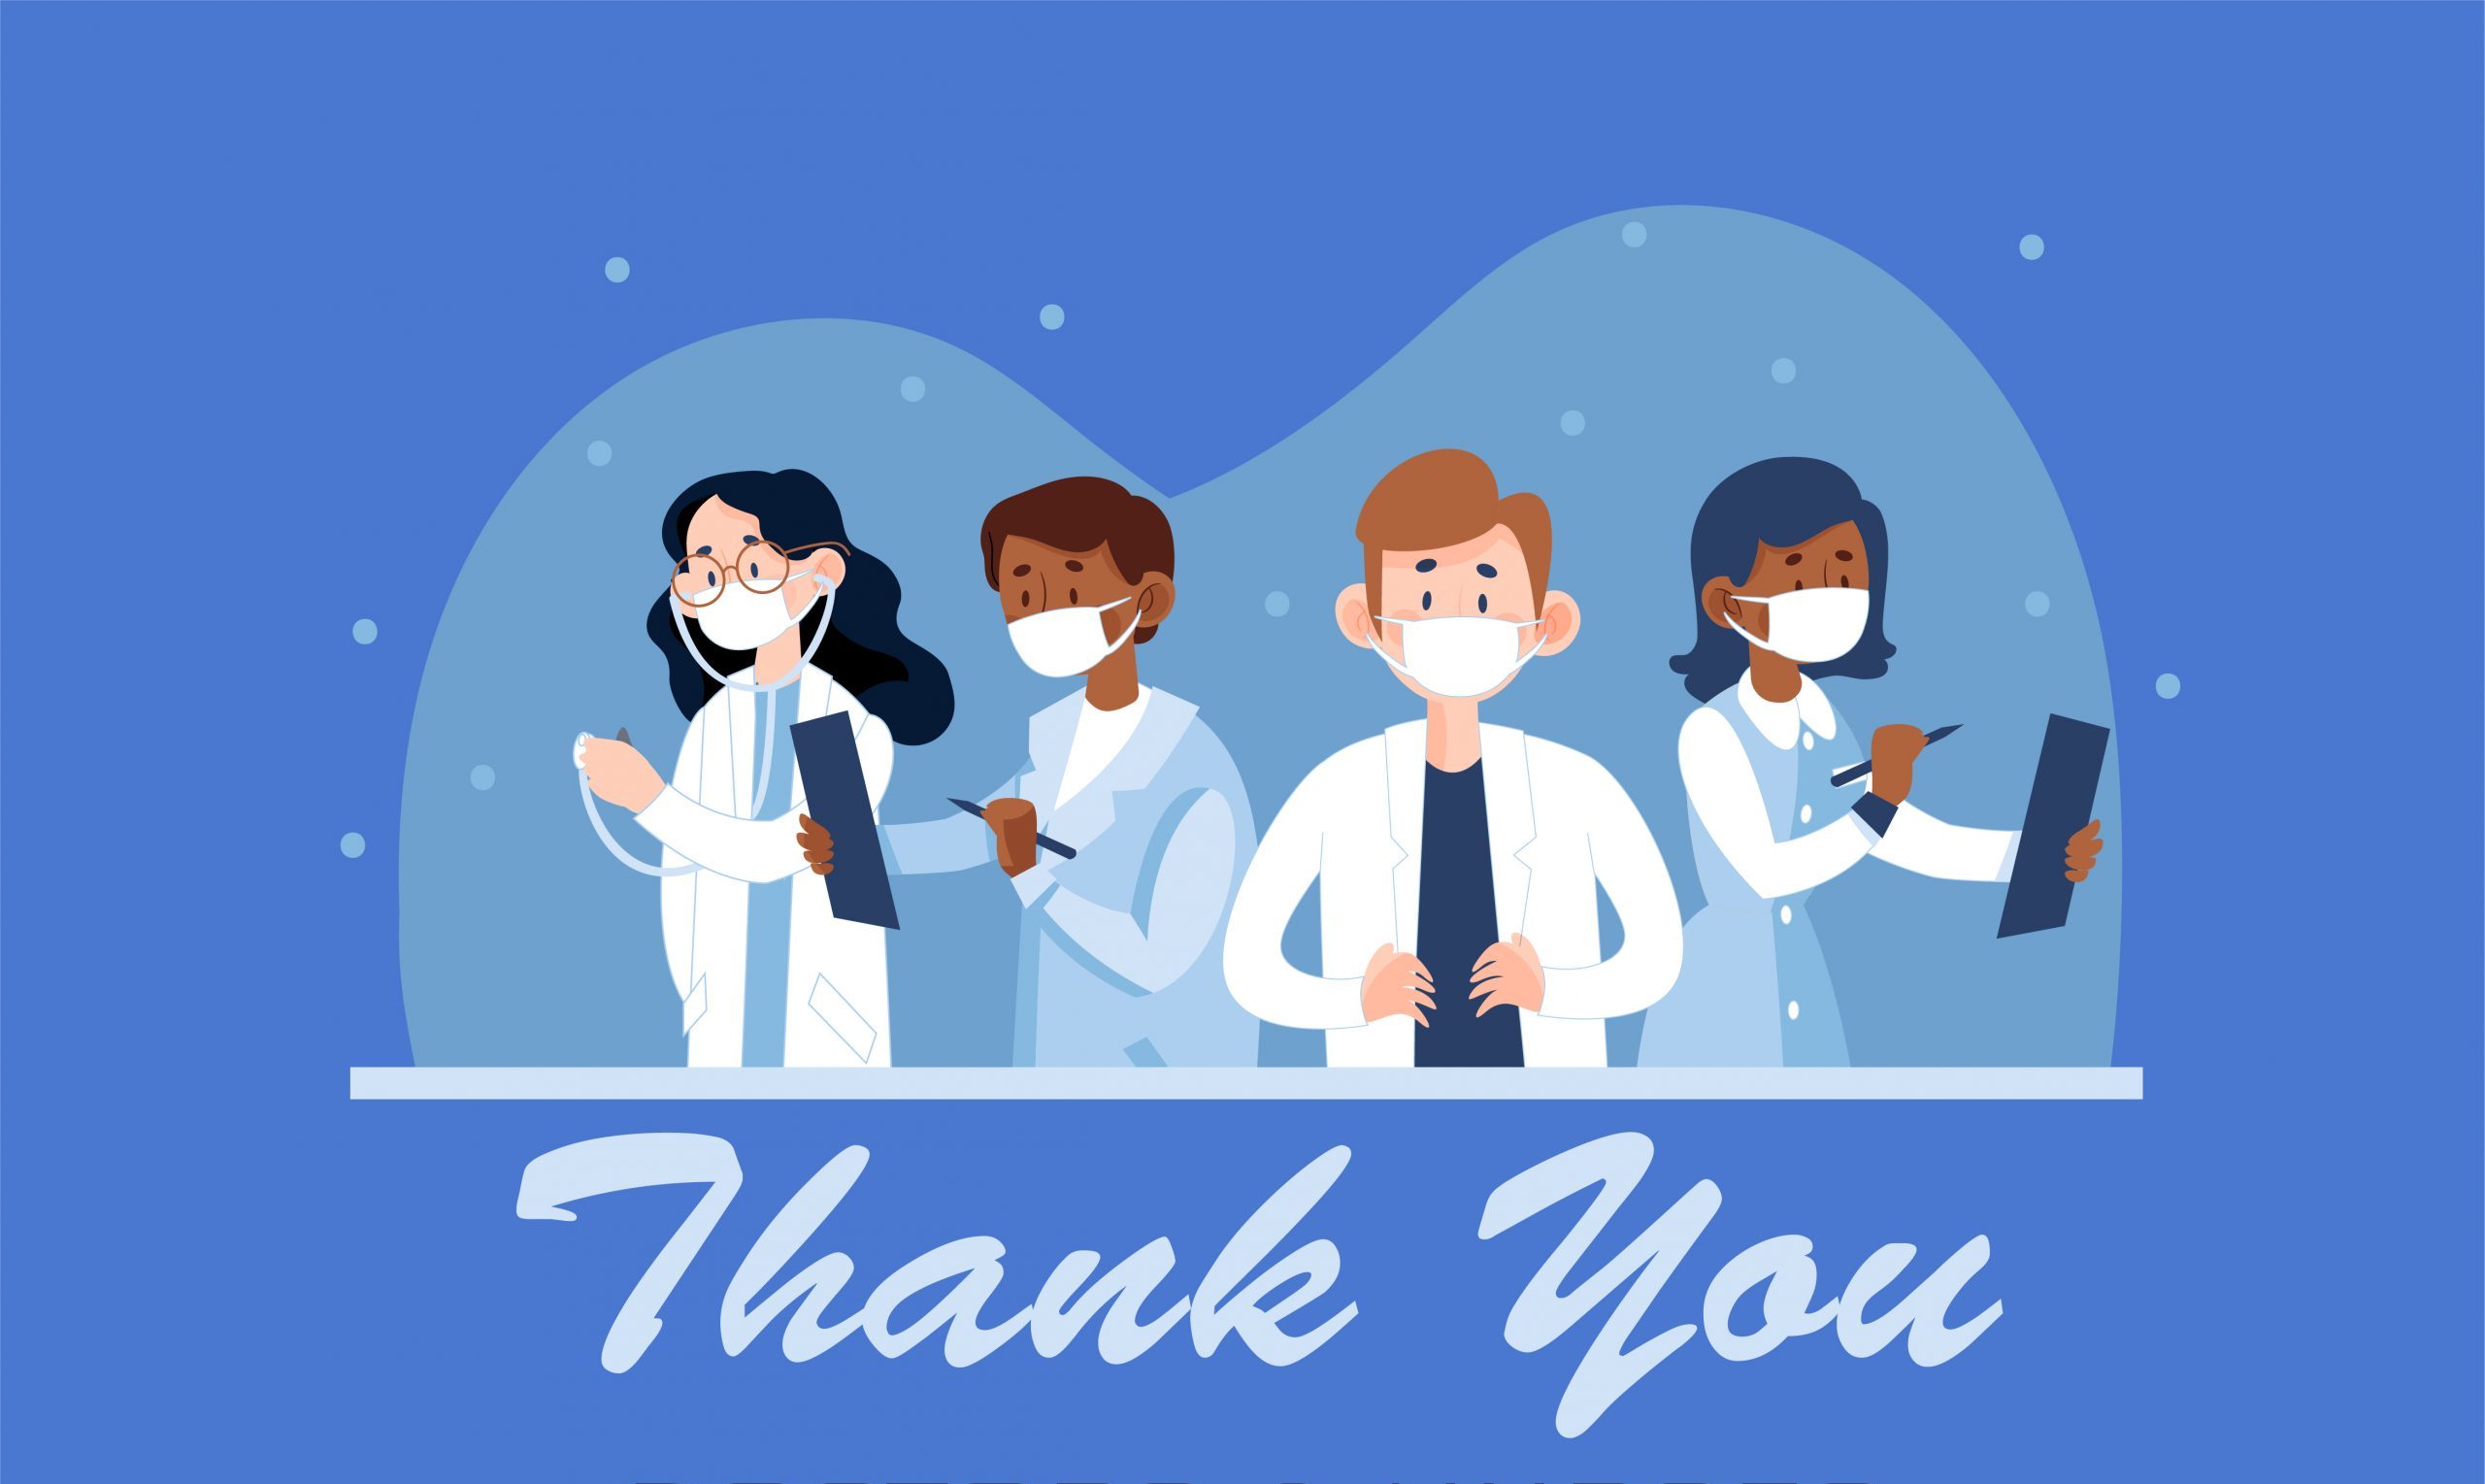 An illustration of four people dressed in medical gowns and masks, with "Thank you" underneath